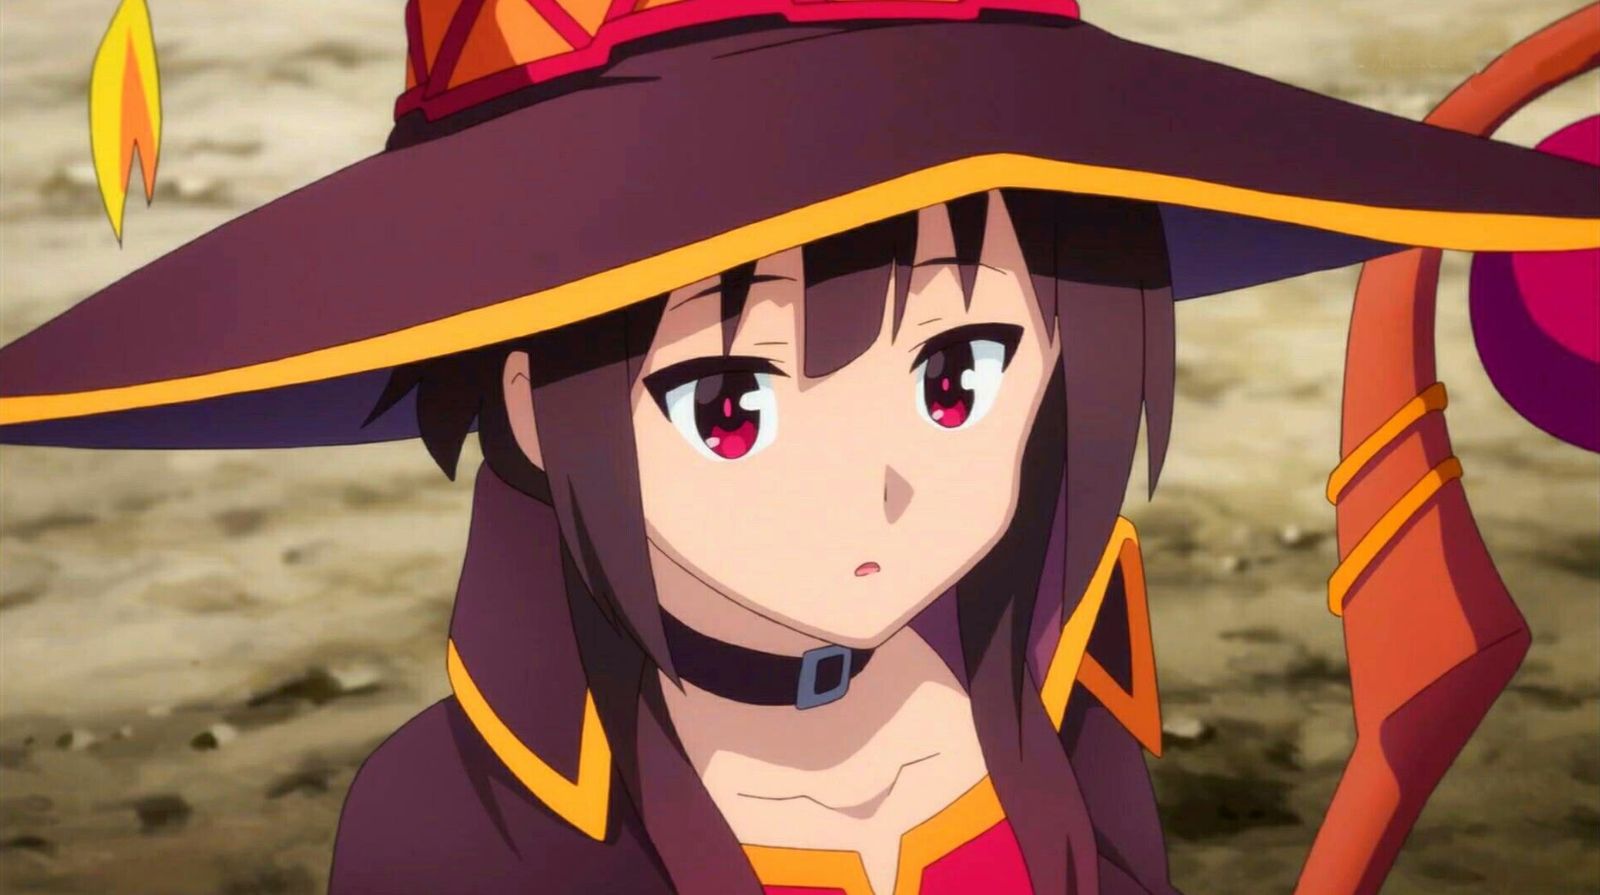 Who Does Megumin End Up With in KonoSuba?